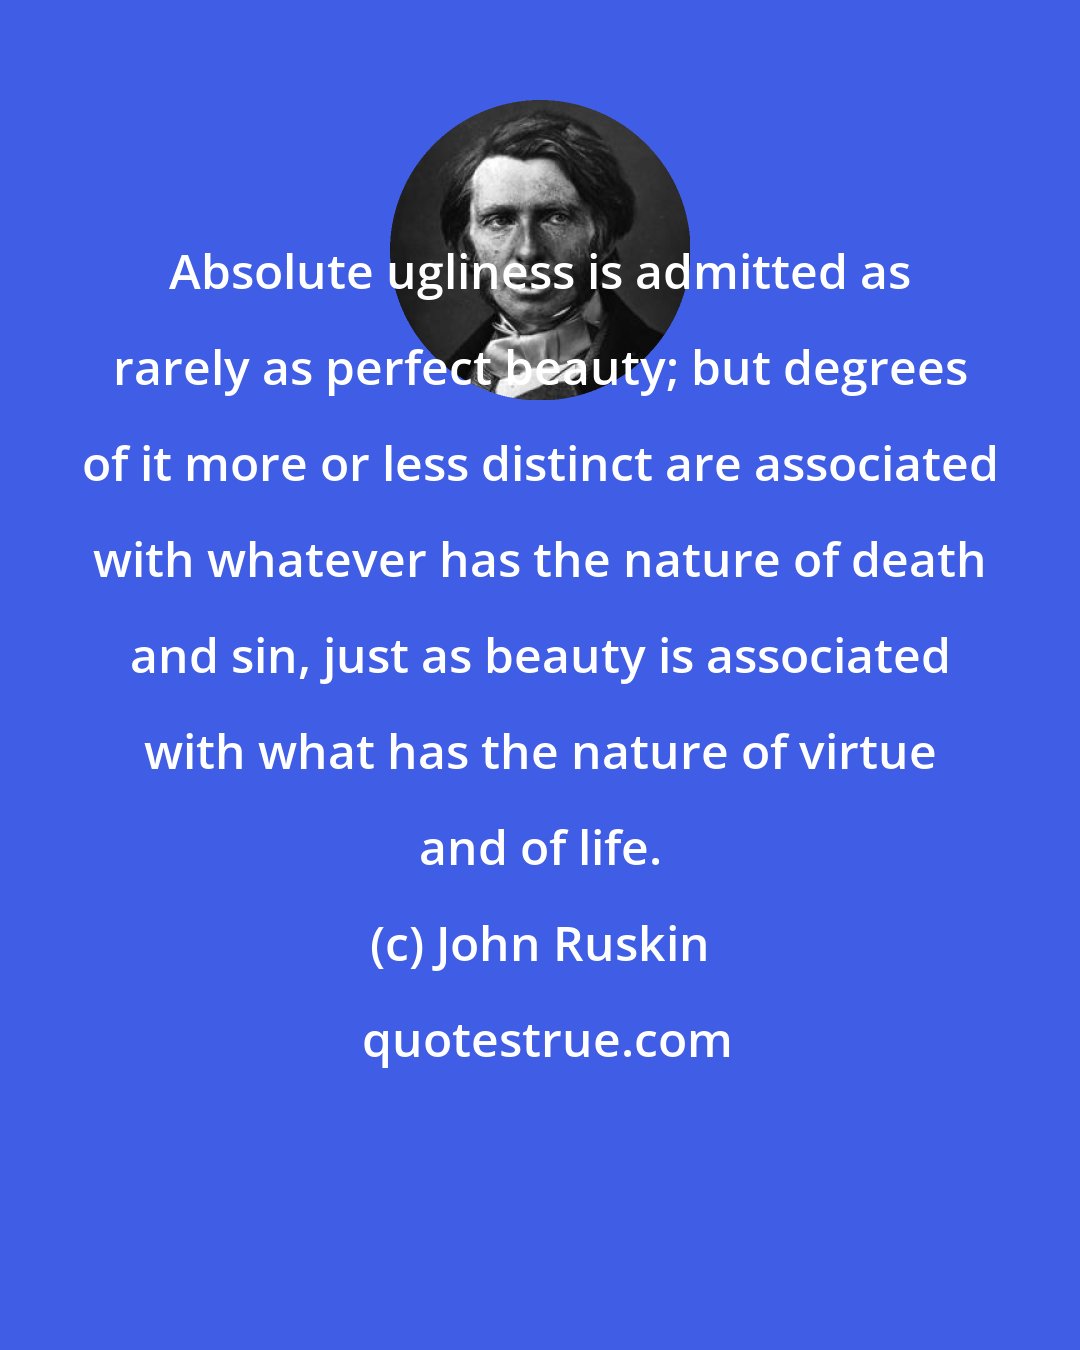 John Ruskin: Absolute ugliness is admitted as rarely as perfect beauty; but degrees of it more or less distinct are associated with whatever has the nature of death and sin, just as beauty is associated with what has the nature of virtue and of life.